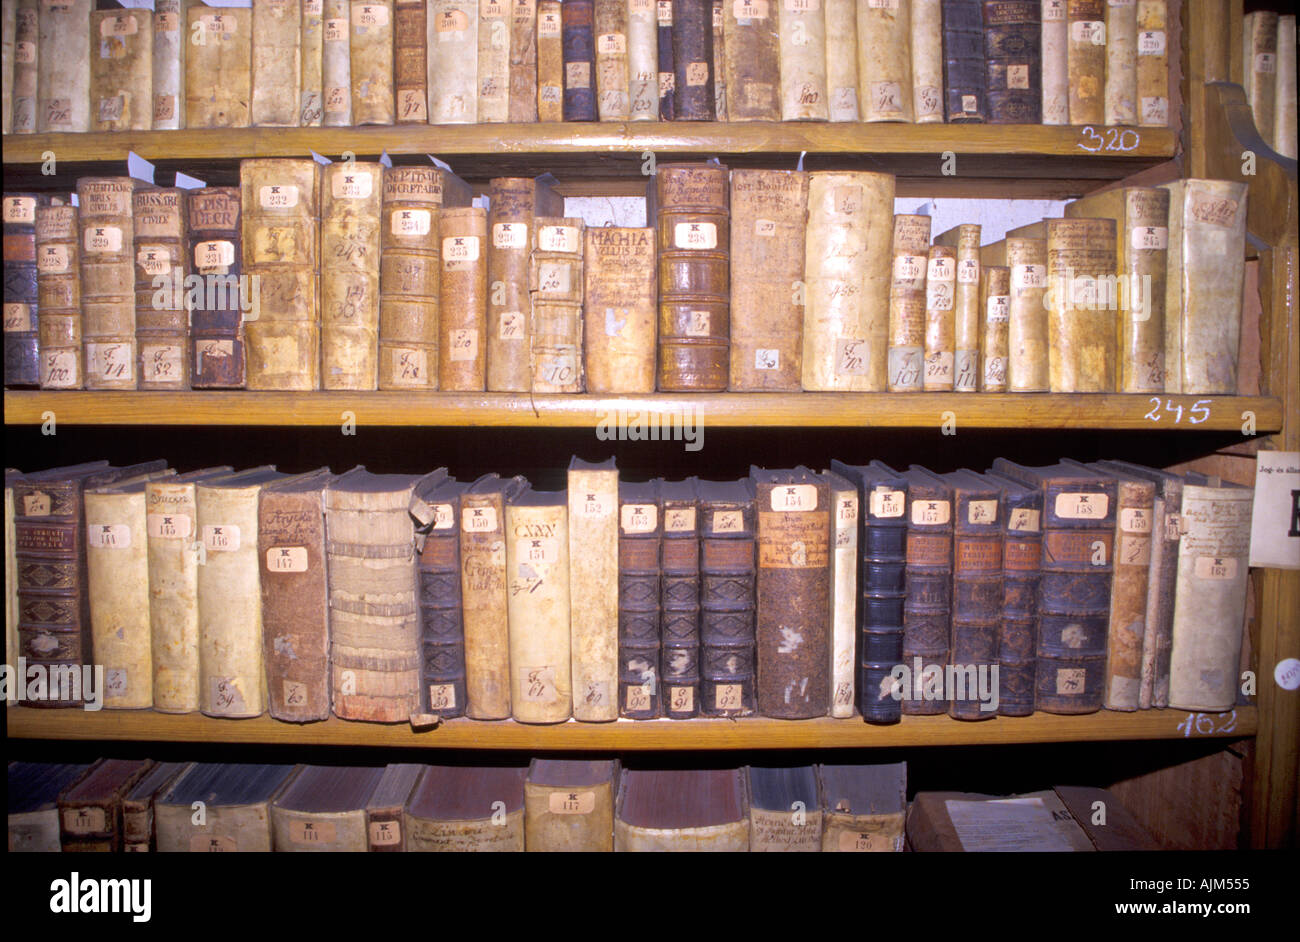 Very old books at bookshelves in library in Hungary Stock Photo